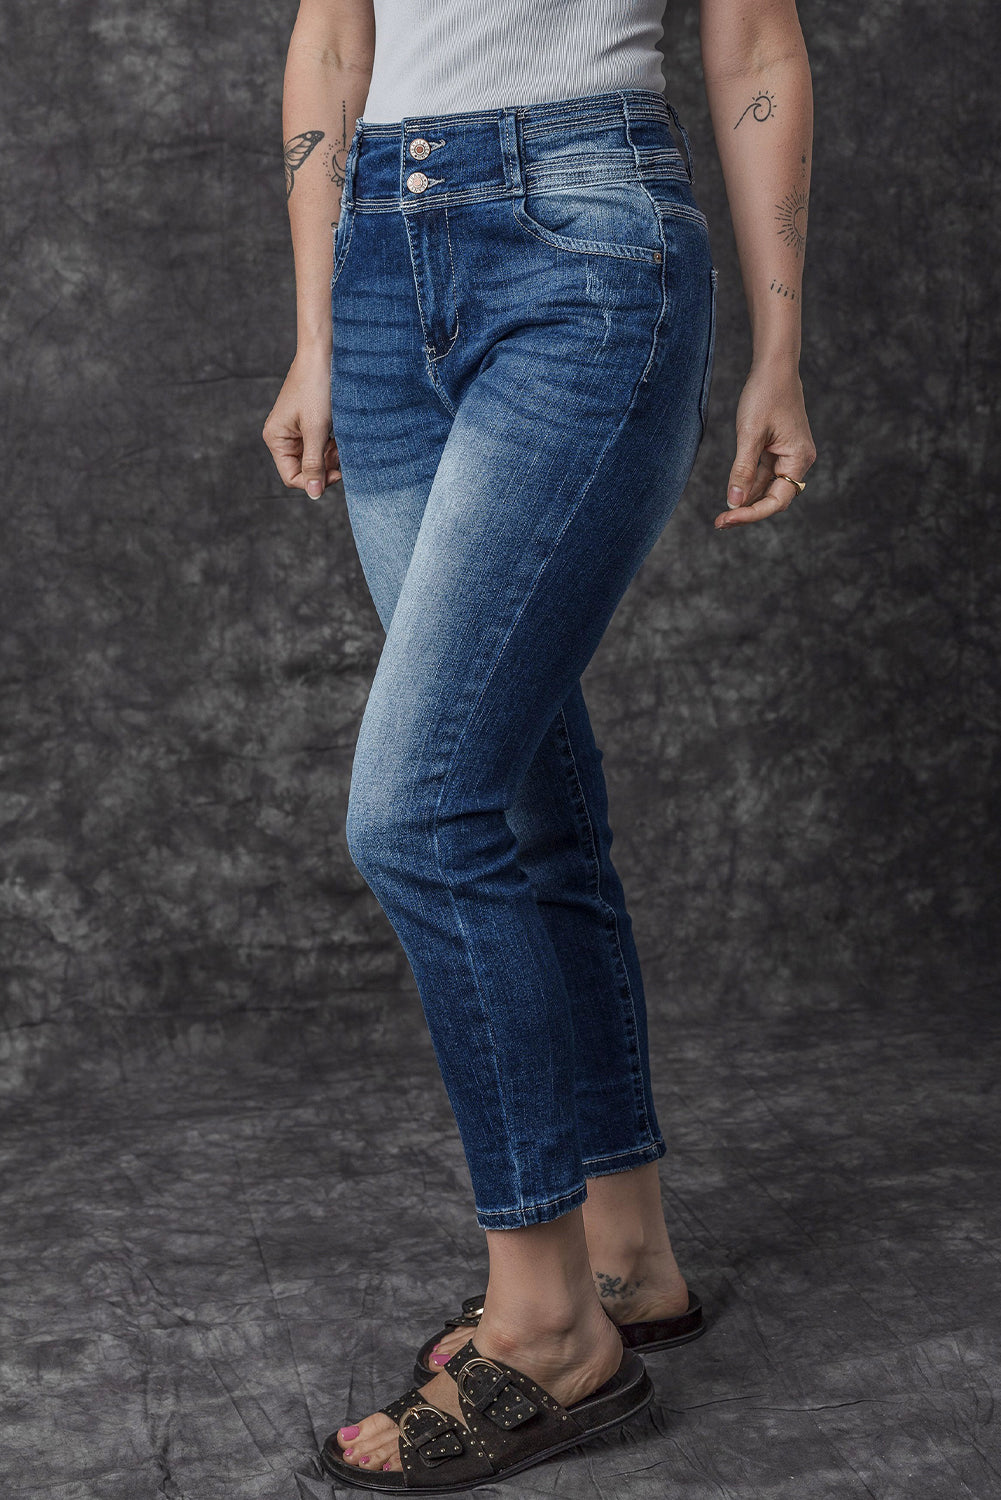 Blue Vintage Washed Two-button High Waist Skinny Jeans - SELFTRITSS